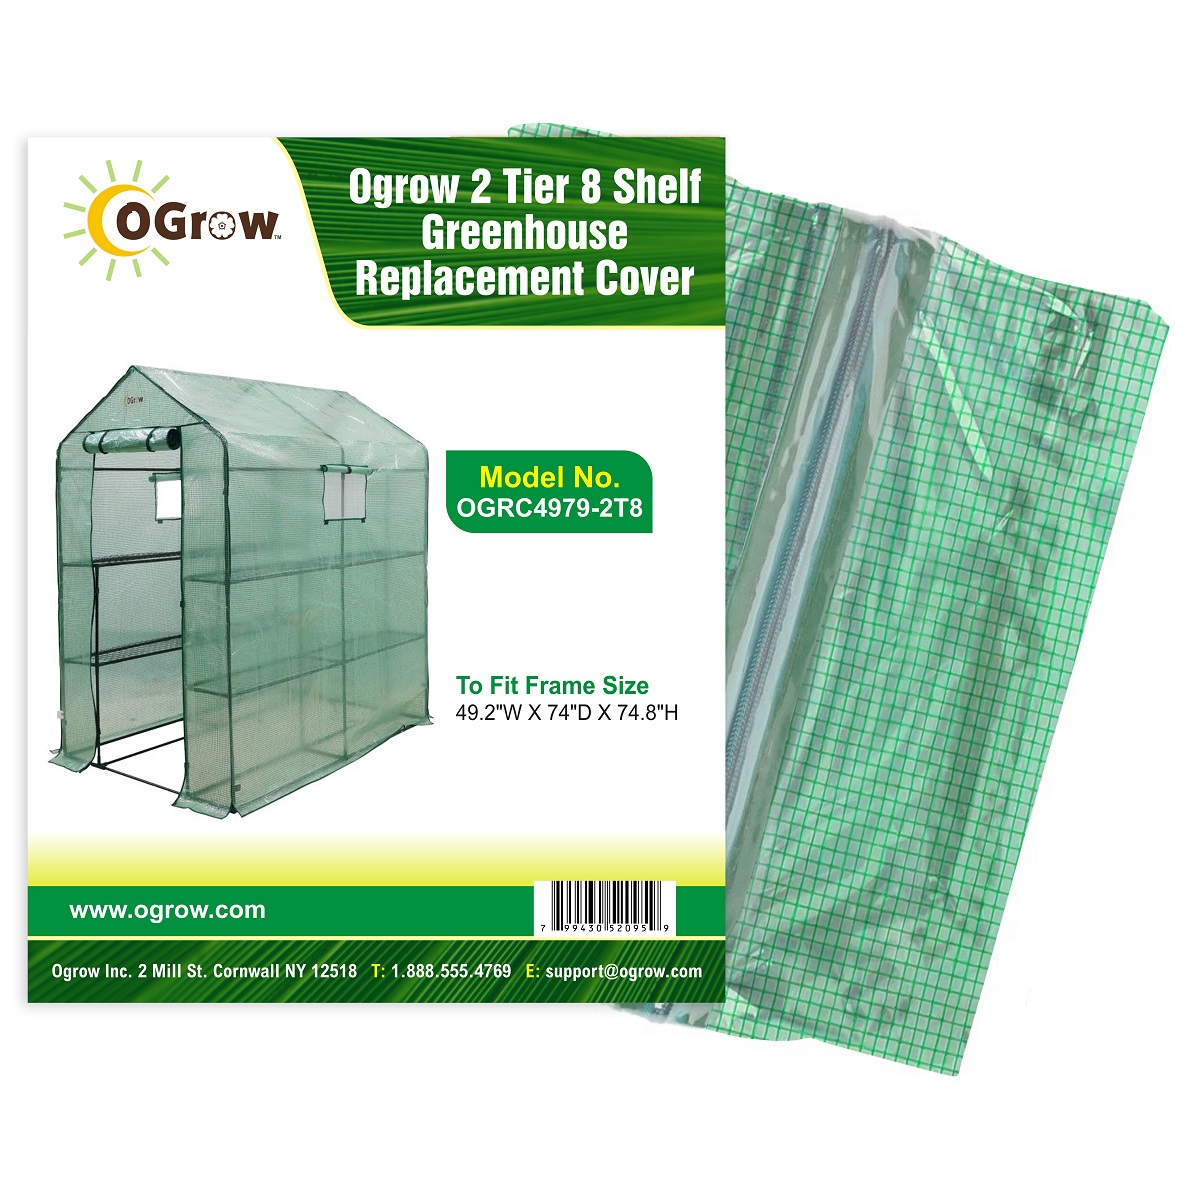 oGrow OGRC4979-2T8 2 Tier 8 Shelf Greenhouse PE Replacement Cover - To Fit Frame Size 49.2"W X 74"D X 74.8"H